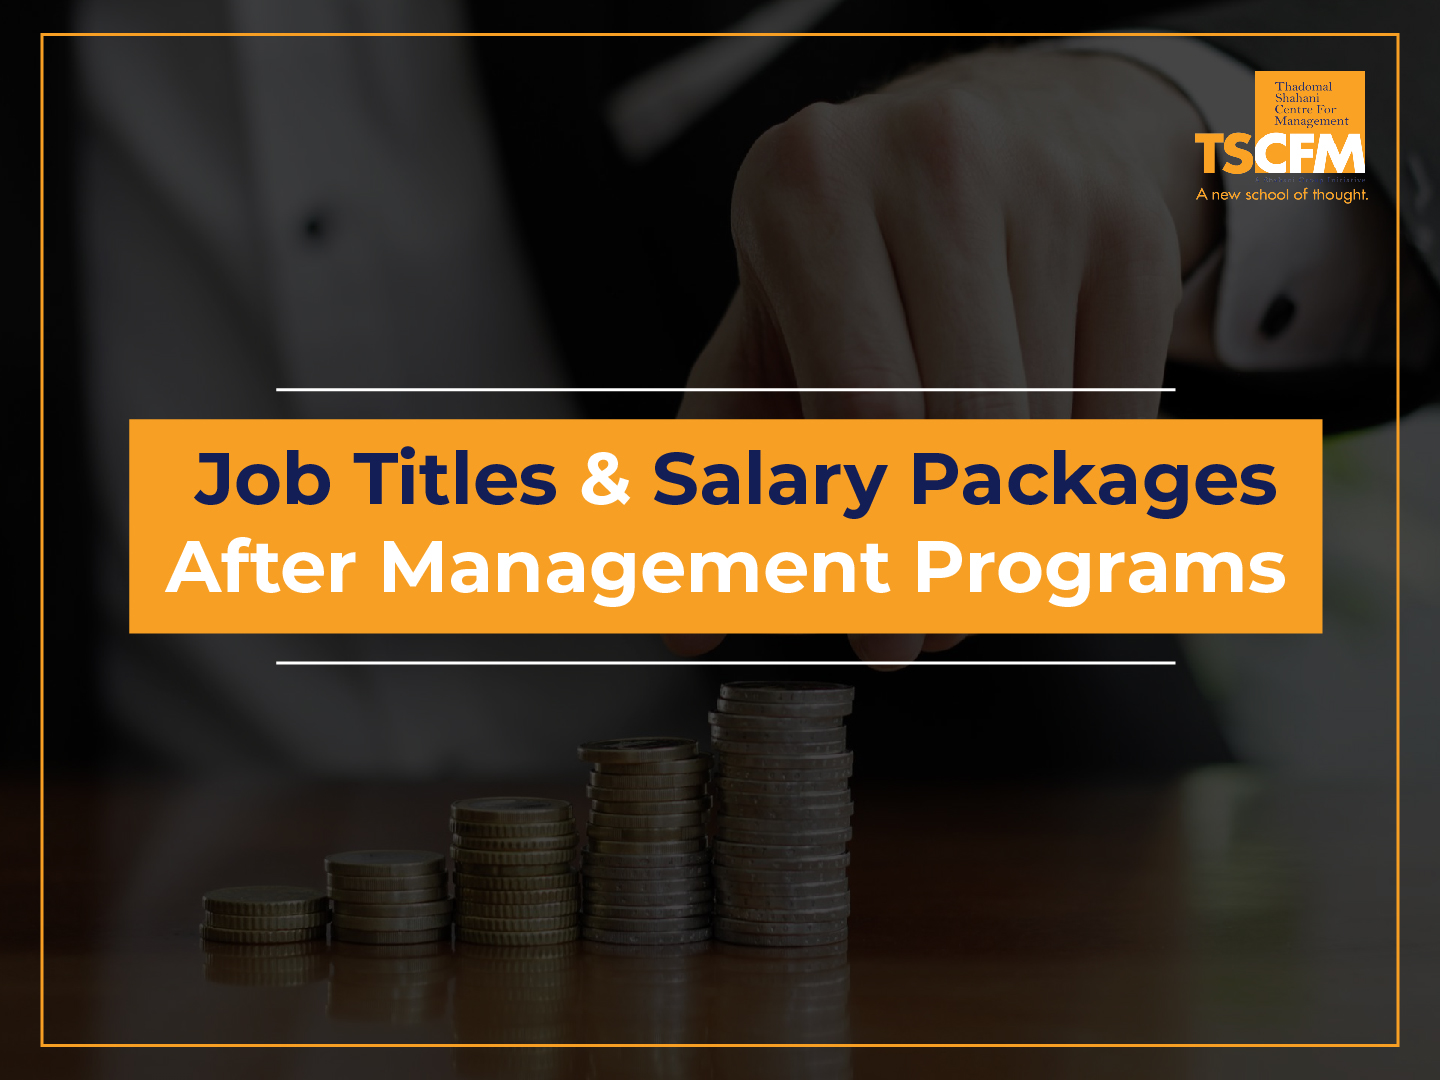 What are the Job titles & salary packages in different sectors after Management Programs?